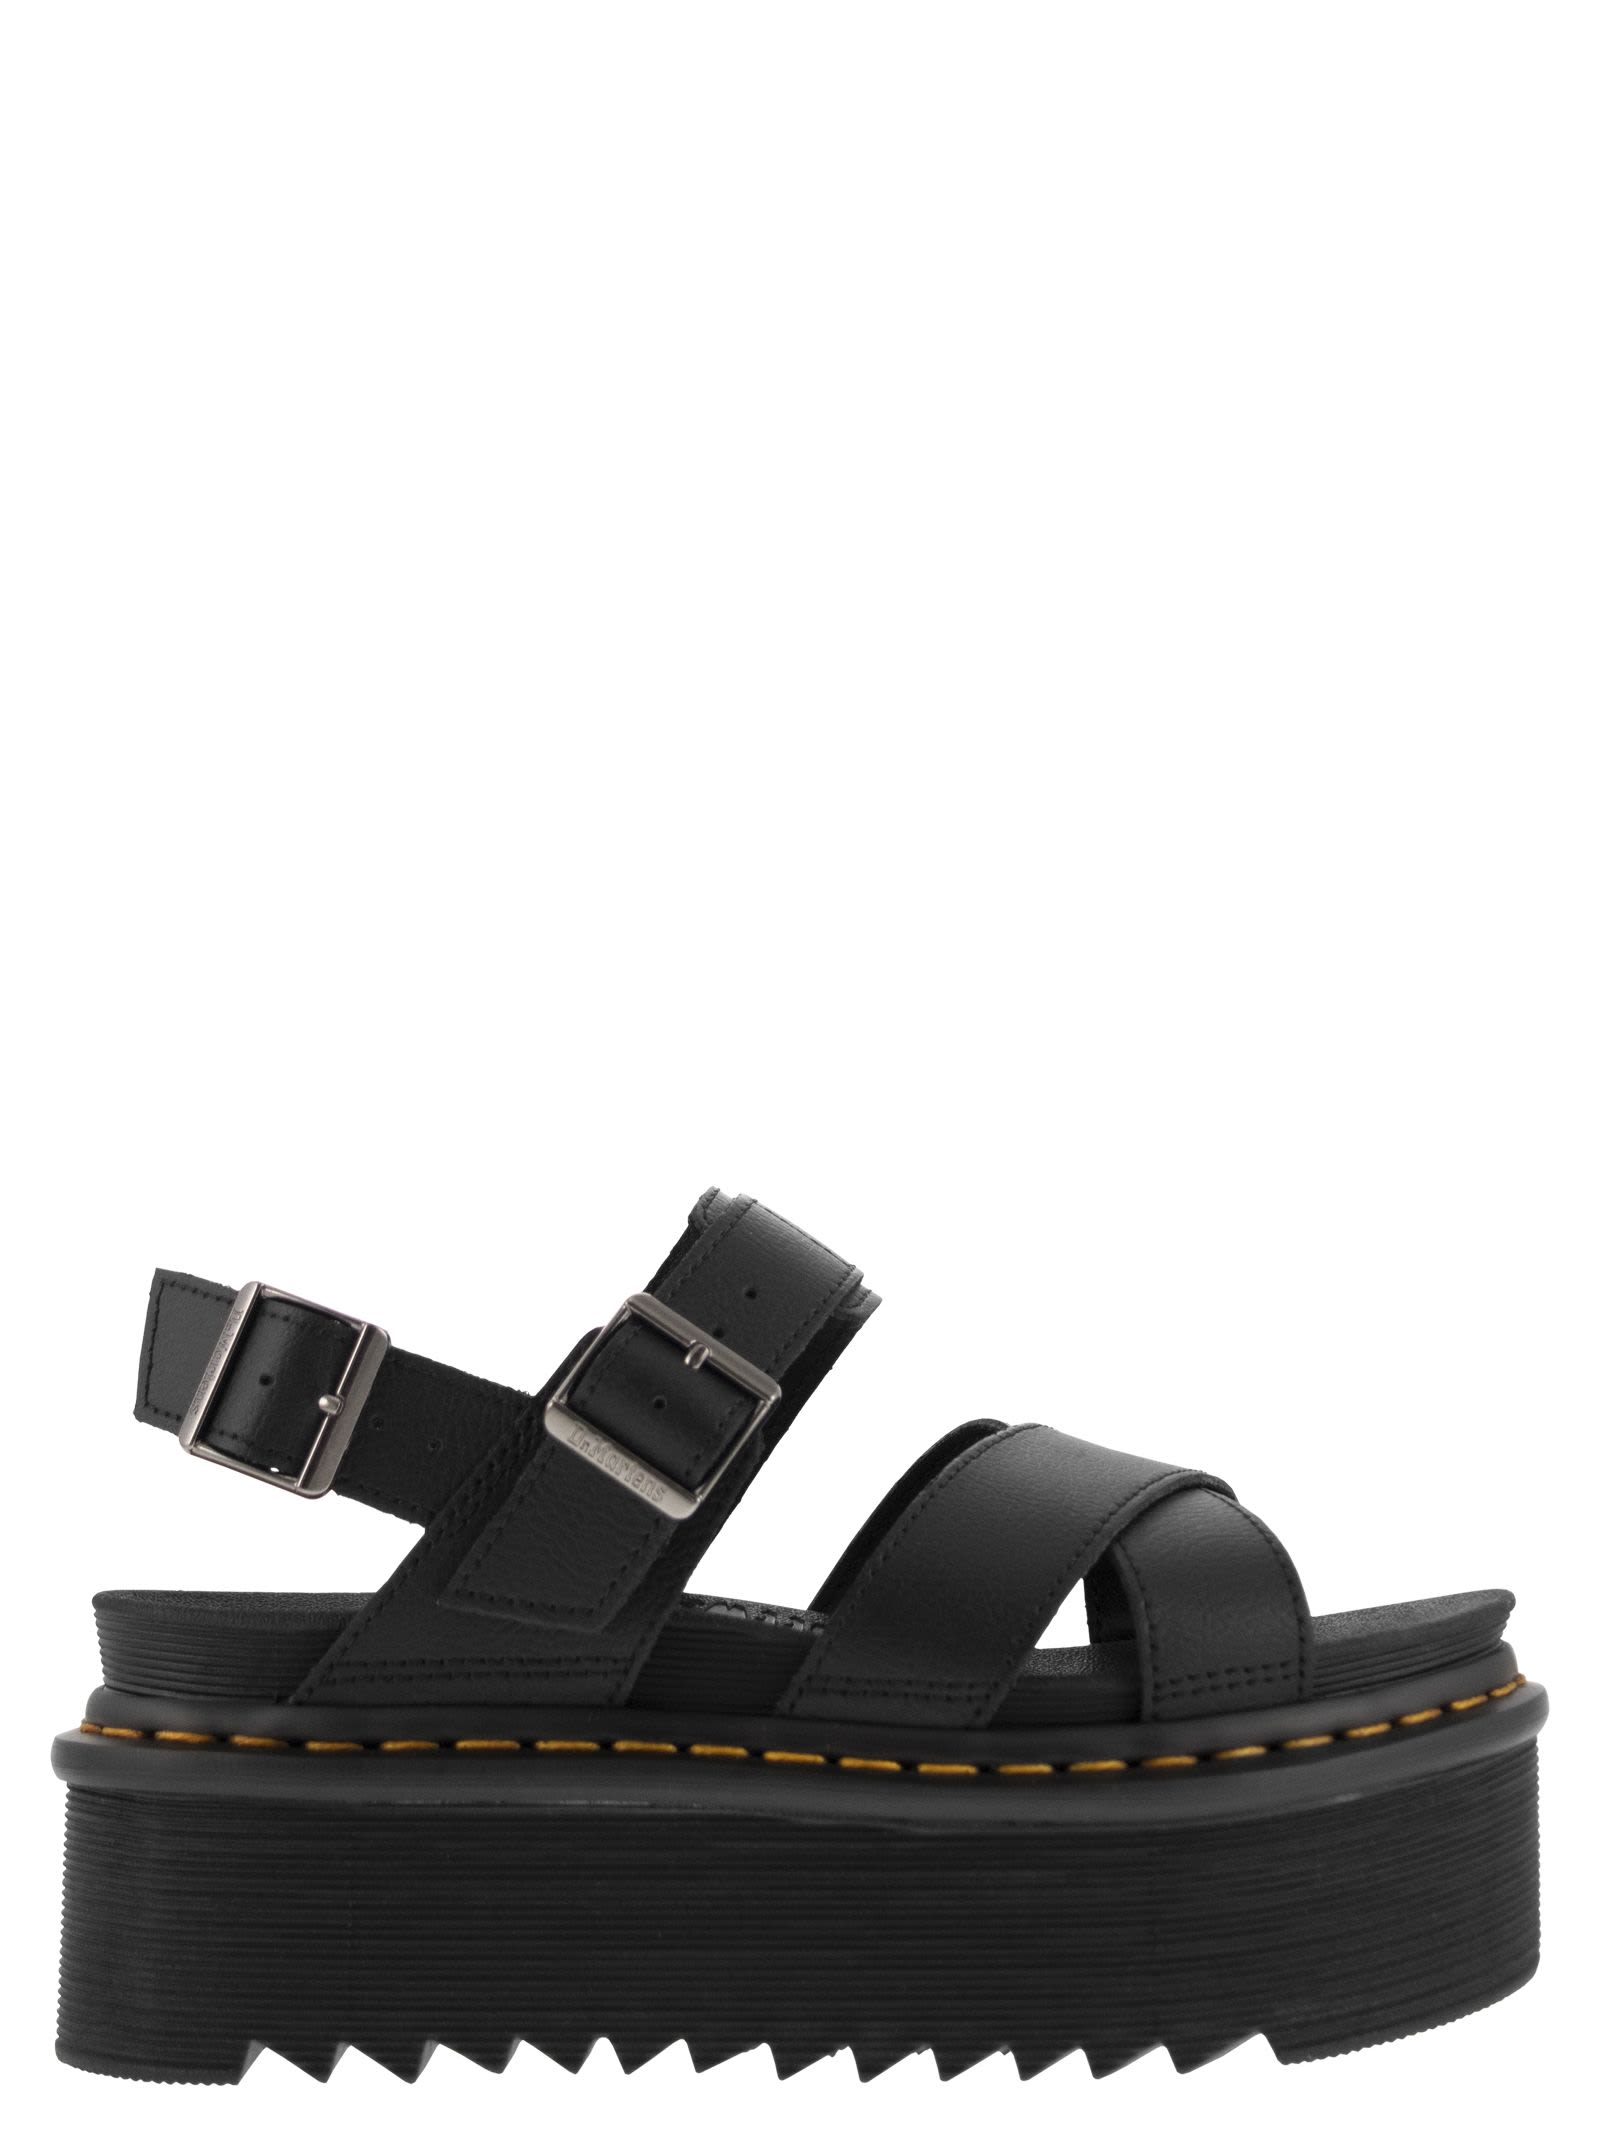 Dr. Martens' Voss Ii Leather Sandals With Straps In Black